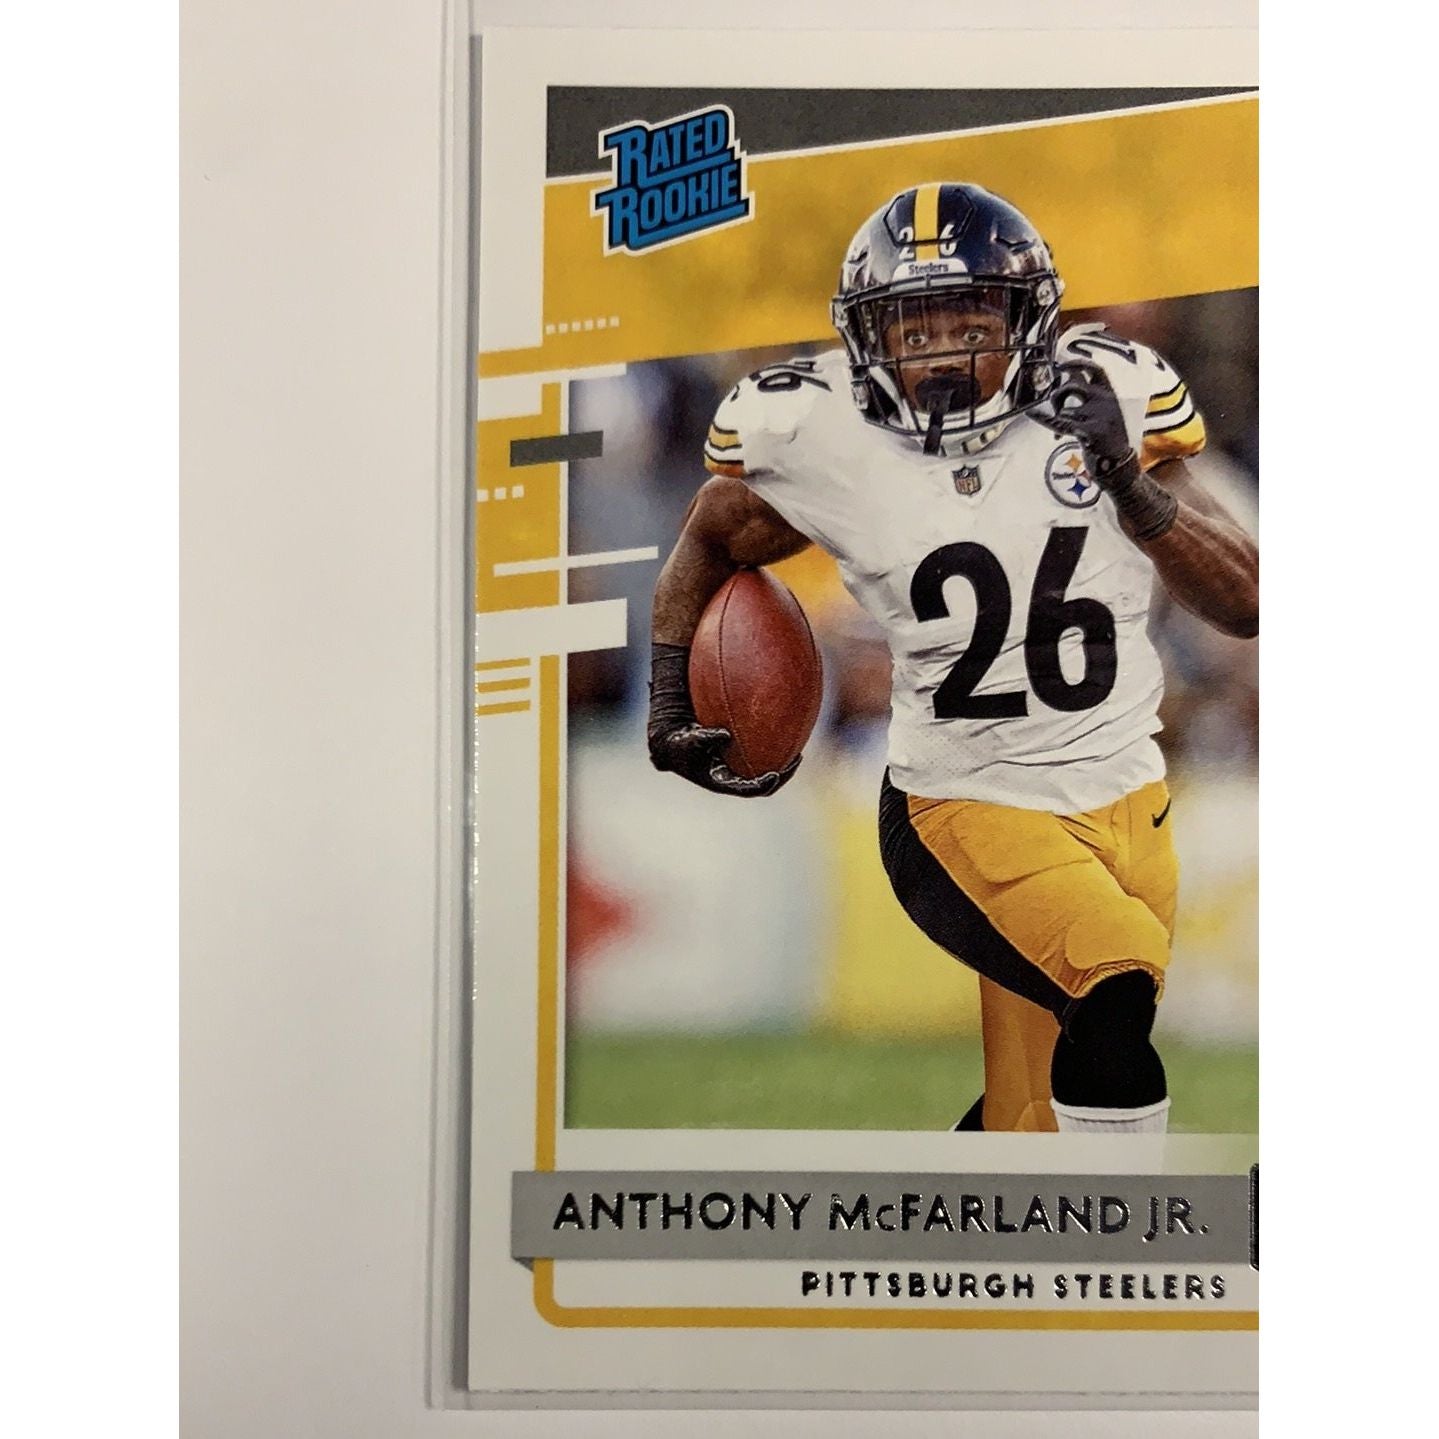  2020 Donruss Anthony McFarland Jr. Rated Rookie  Local Legends Cards & Collectibles